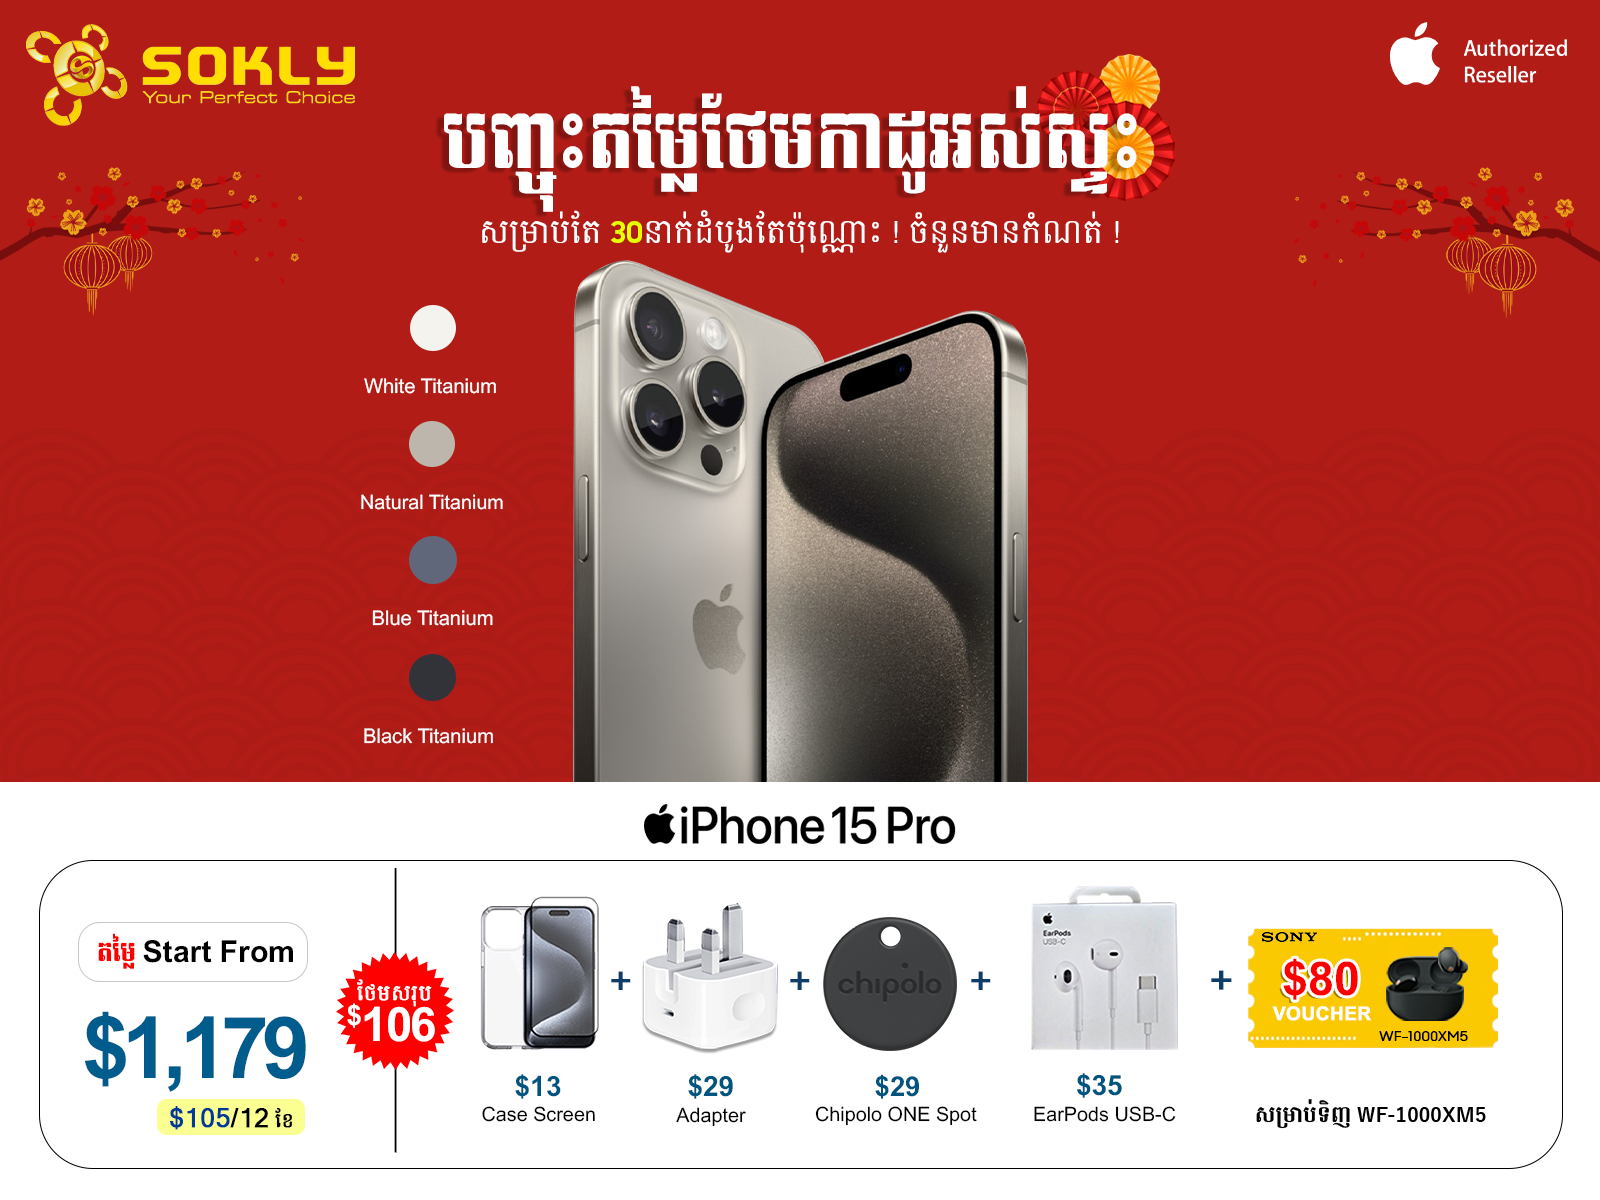 Sokly Phone Shop  Best Place to Get Your Hand on RhinoShield MOD